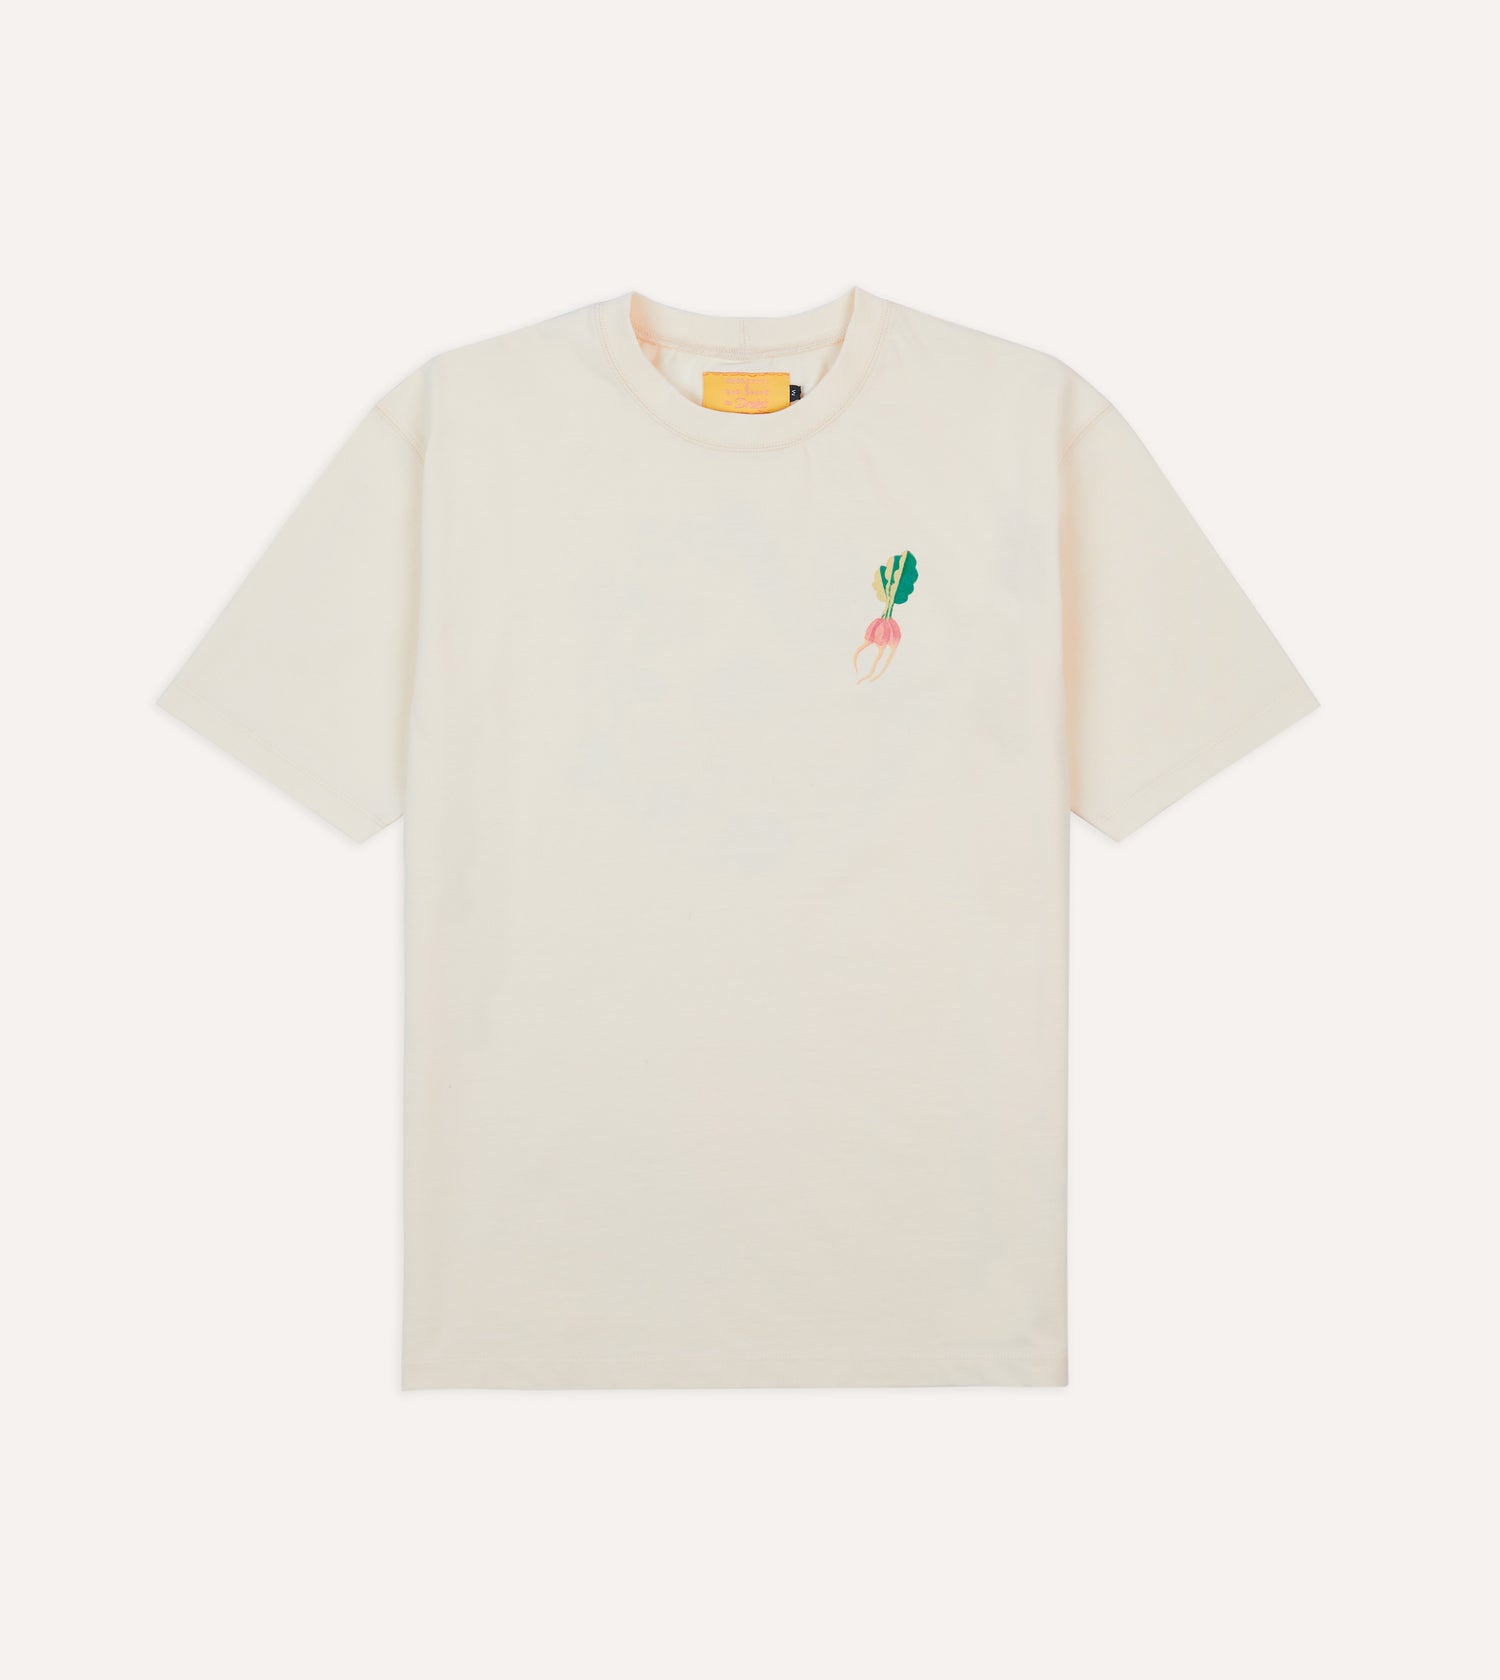 Andreotti & Baribeaud for Drake's 'Jour de Marché' T-Shirt